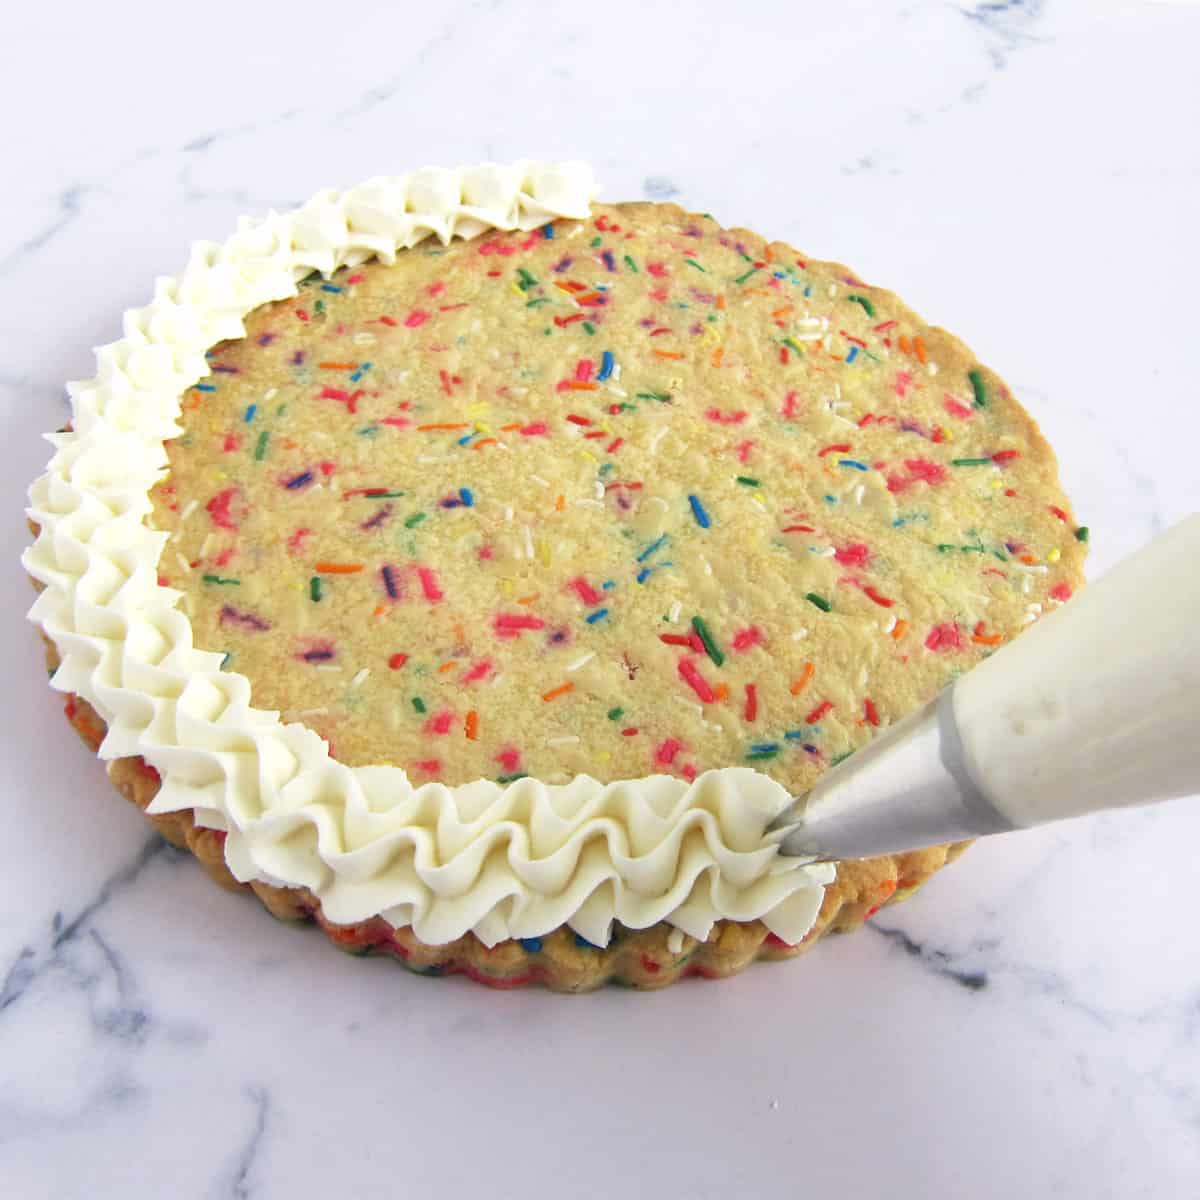 piping frosting on a sugar cookie cake filled with sprinkles